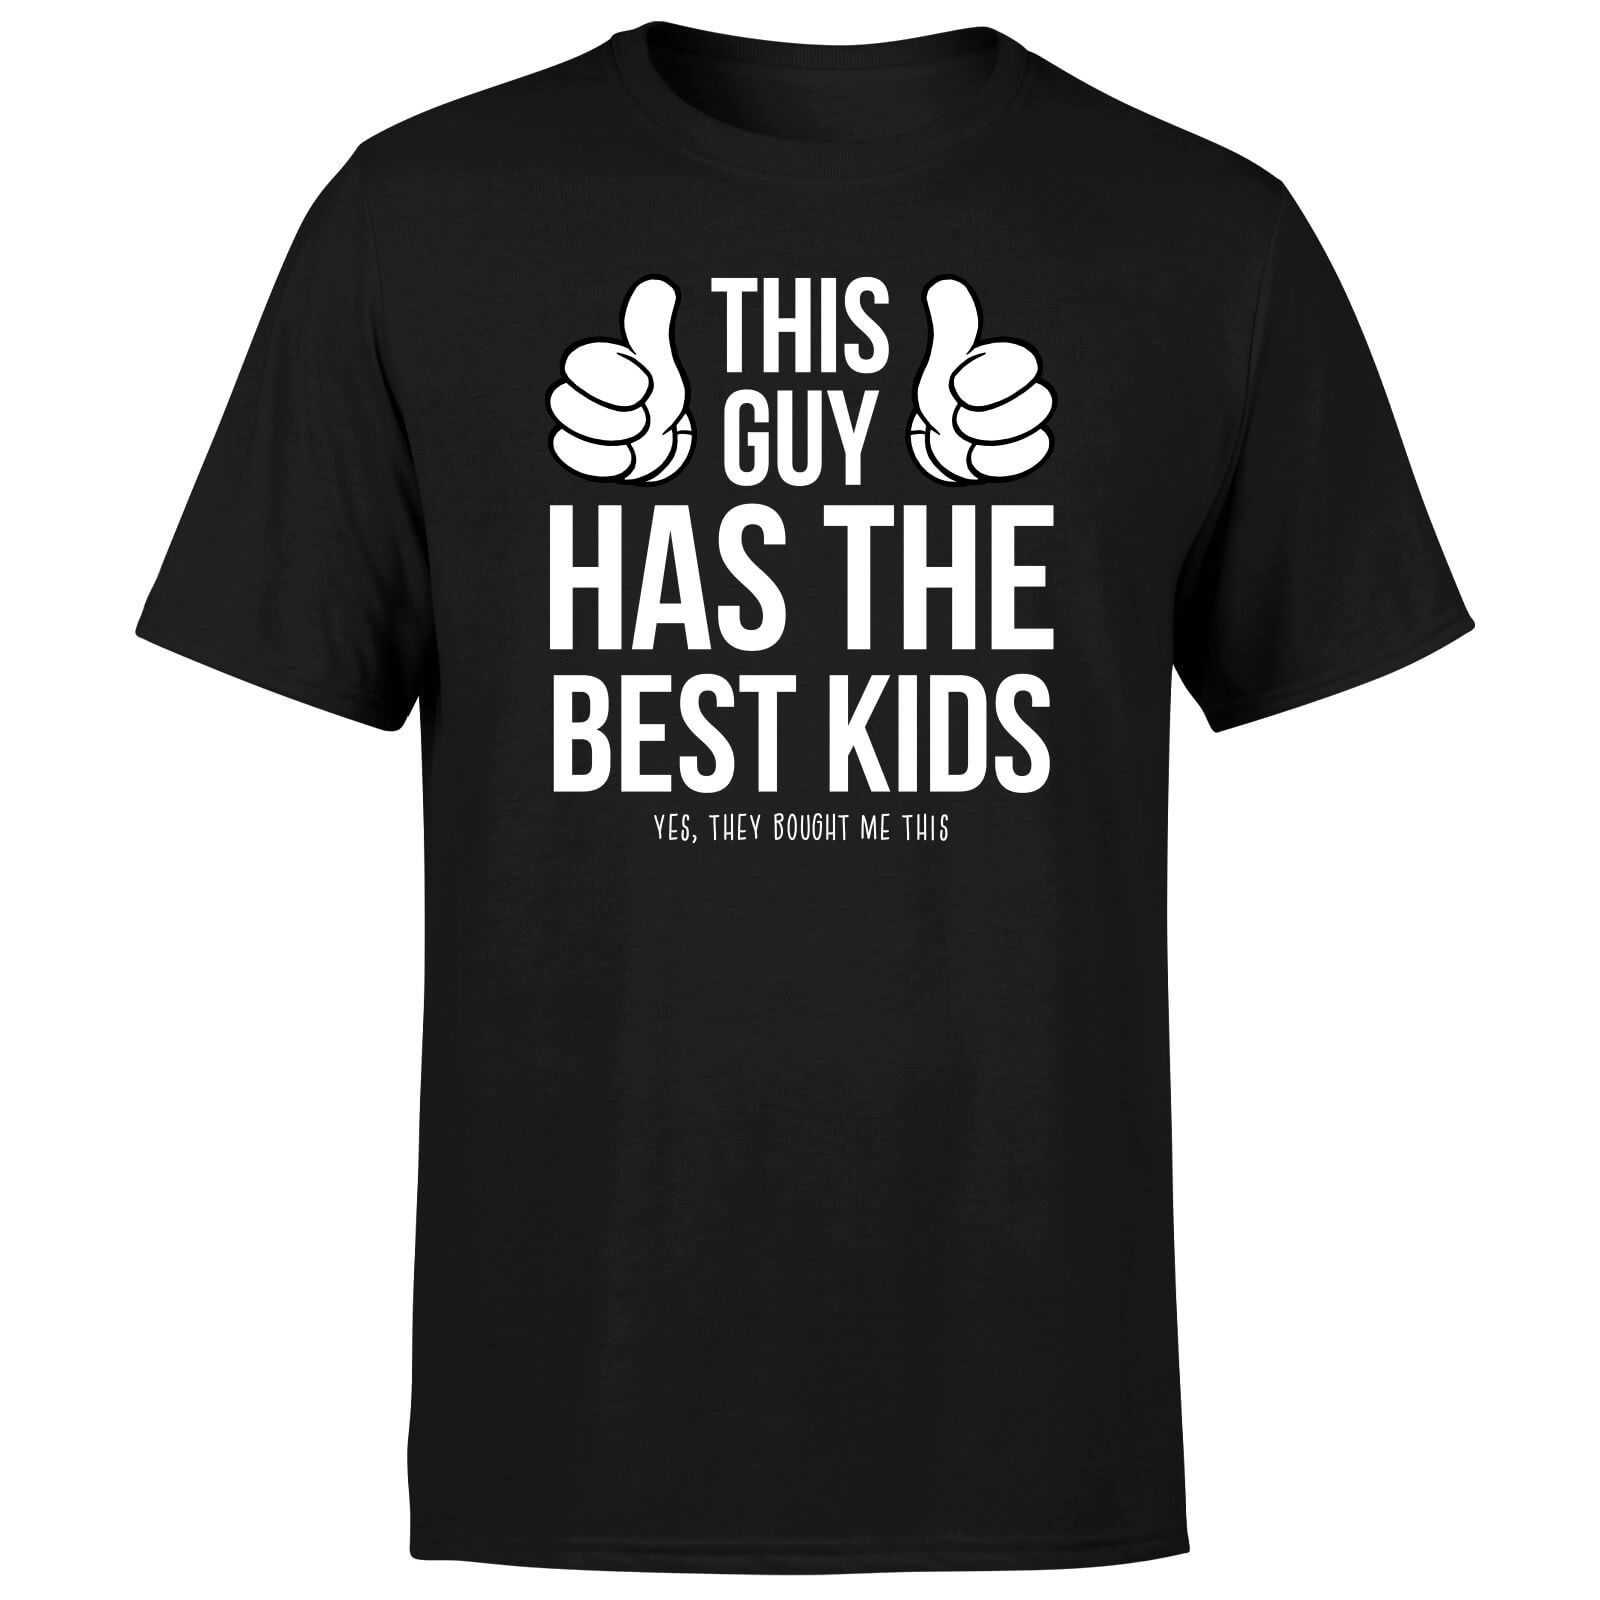 This Guy Has The Best Kids Yes They Brought Me This Men's T-Shirt - Black - Xs